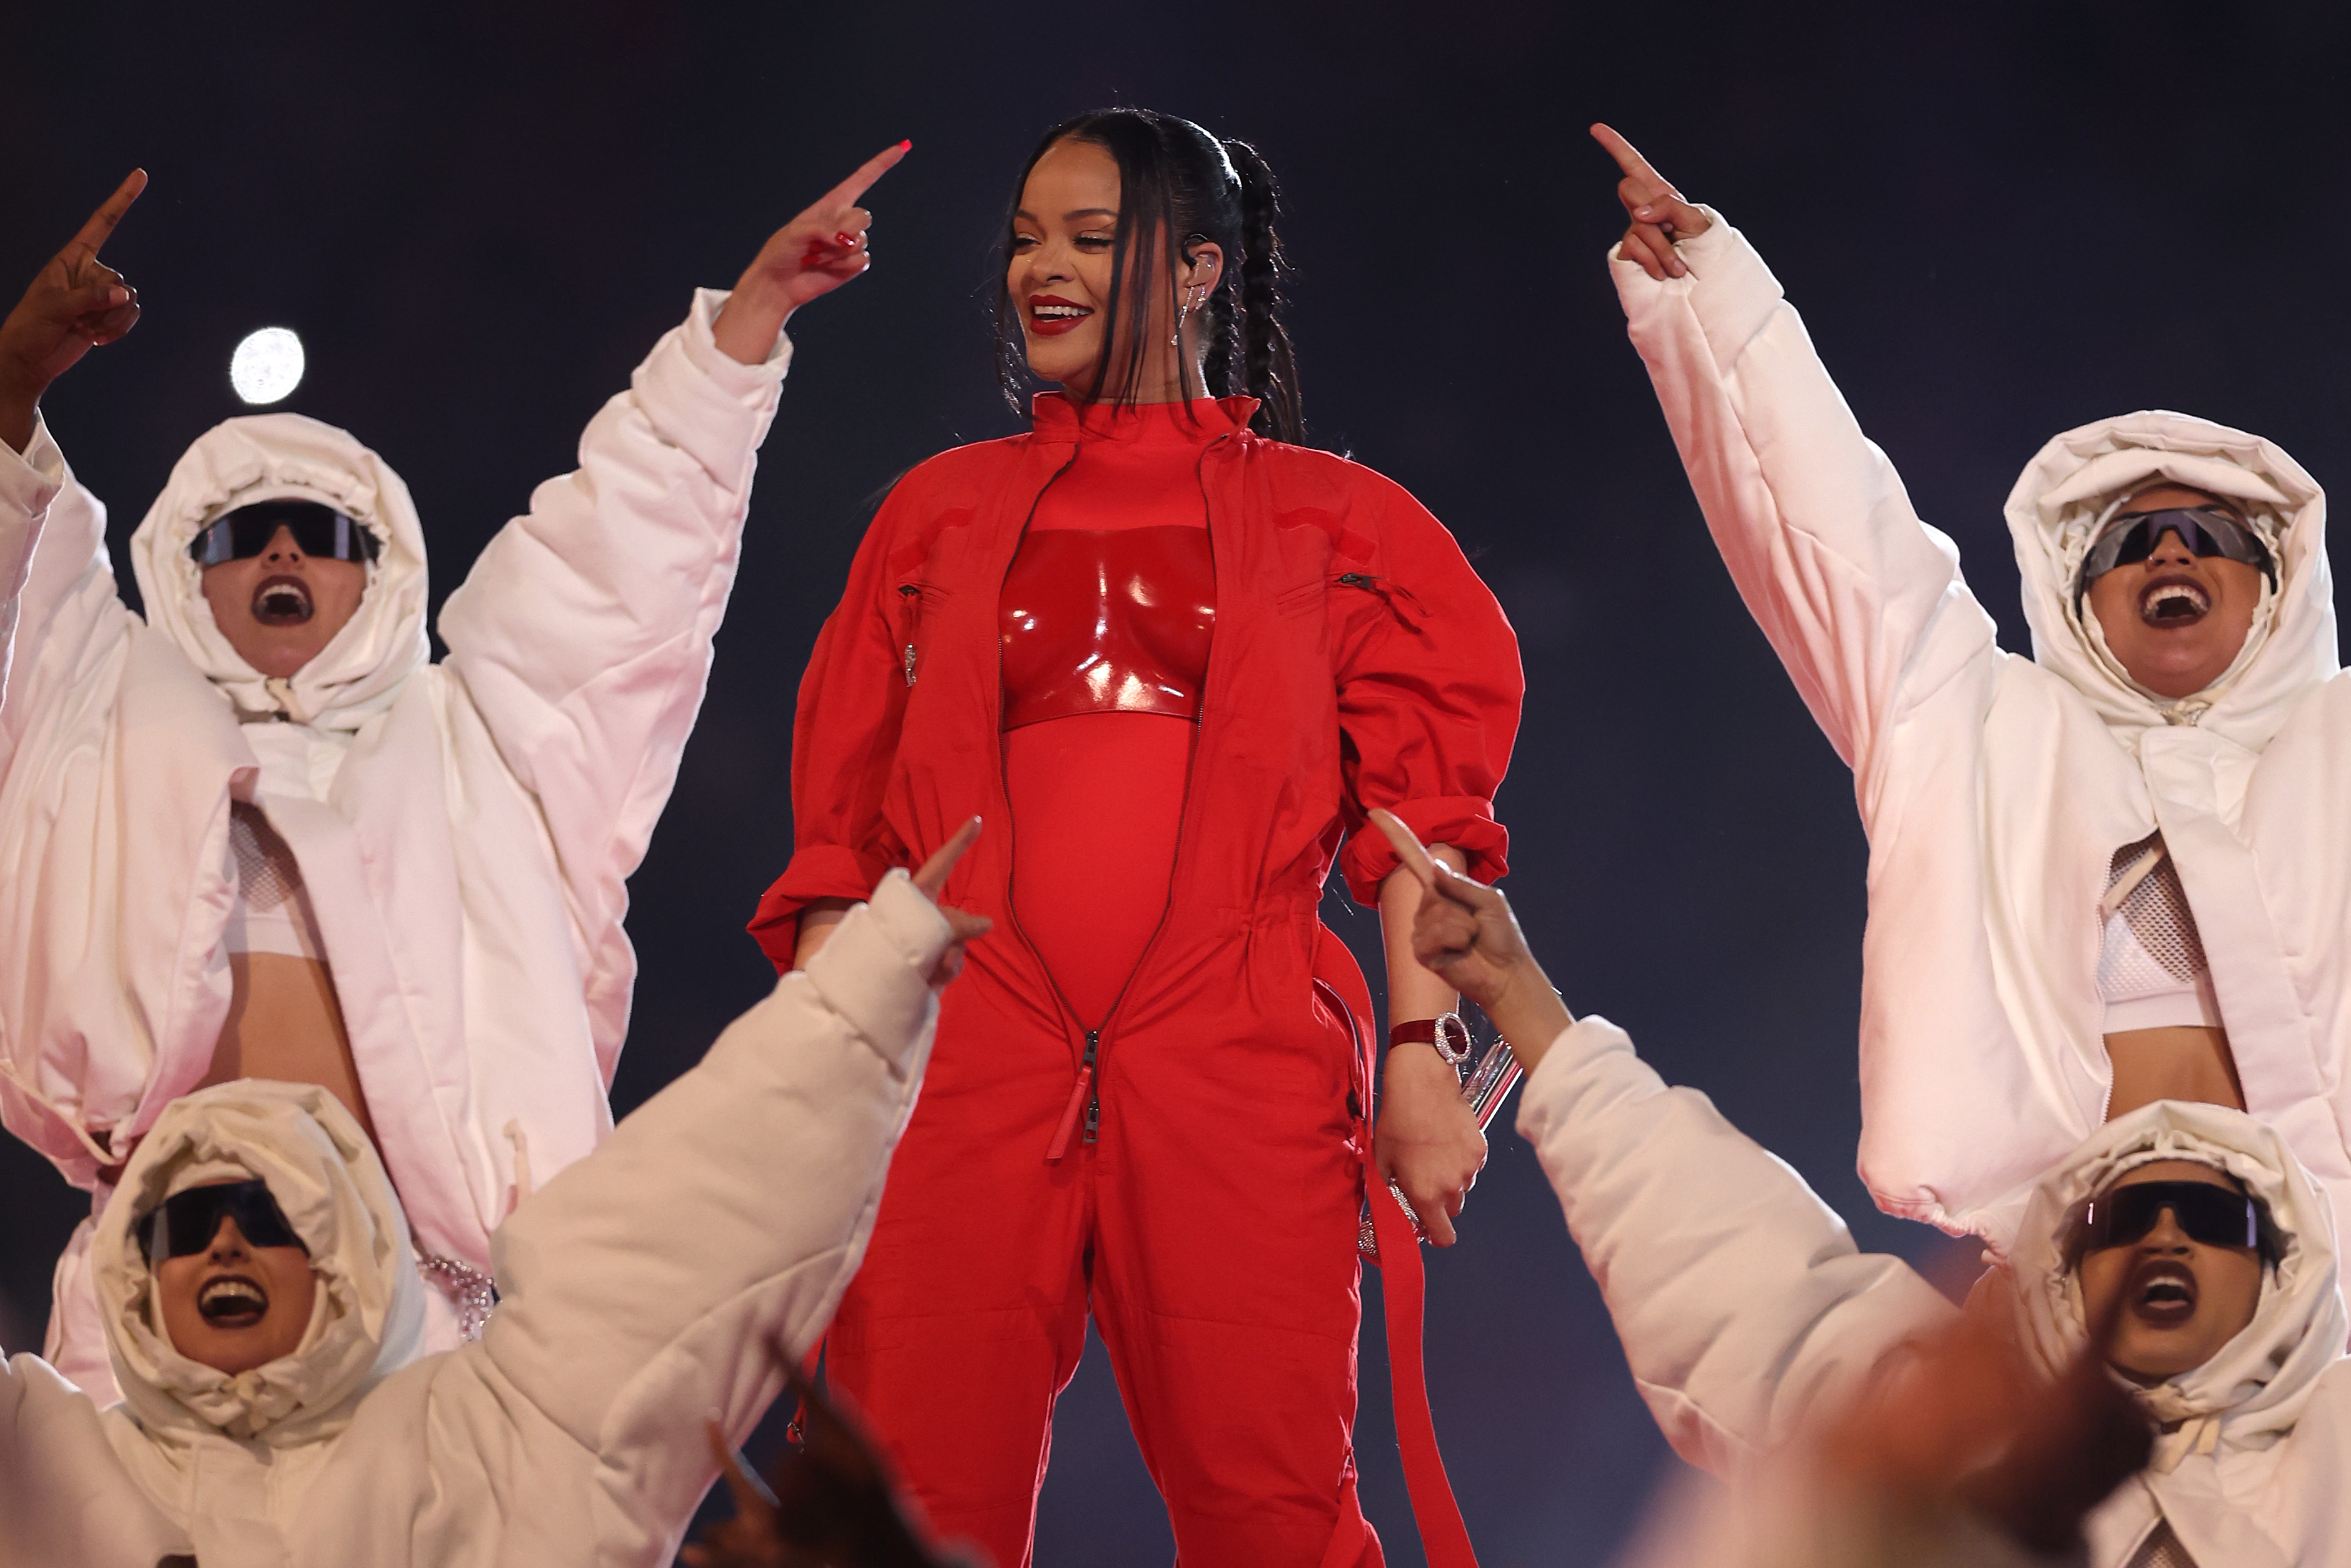 Rihanna’s Baby Bump Is On Full Display In New Up-Close Photo From Super Bowl